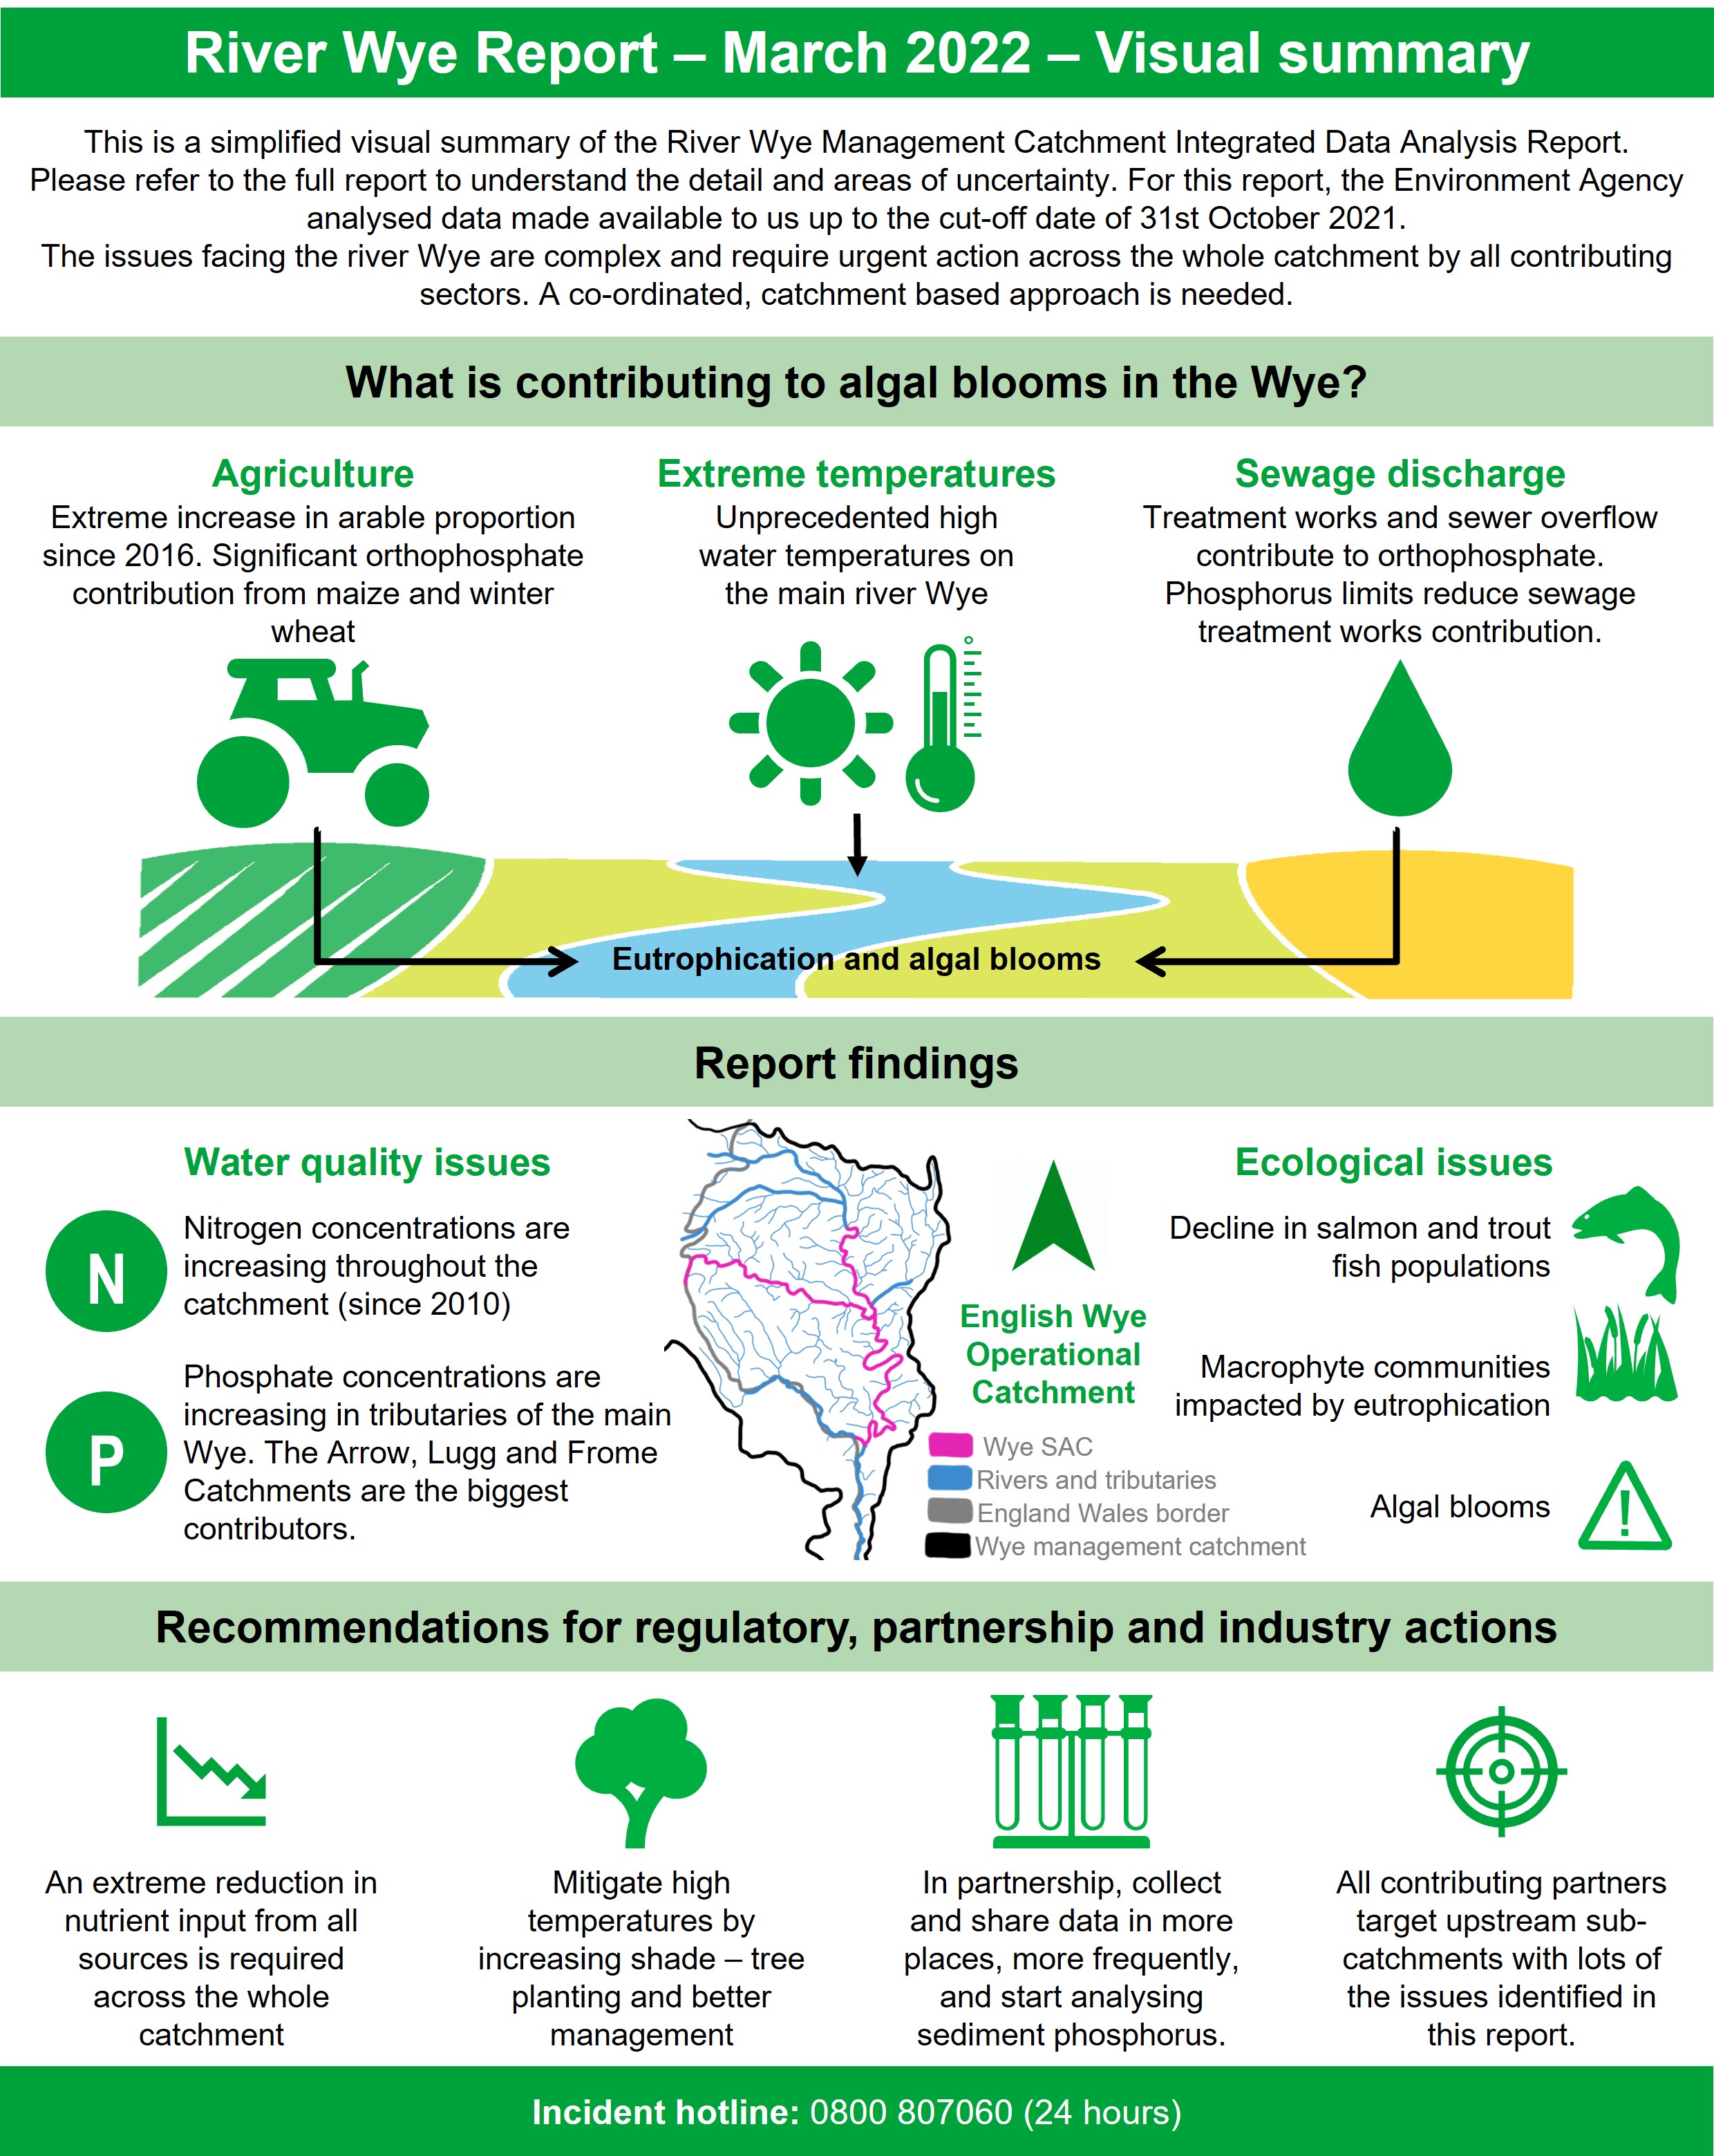 A simplified visual summary of the River Wye Management catchment Integrated Data Analysis Report.    Please refer to the full report to understand the detail and areas of uncertainty. For this report, the Environment Agency analysed data made available to us up to the cut-off date of 31st October 2021.   Based on that data we can conclude that increases in arable land cover, extreme water temperatures and sewage discharges are contributing to algal blooms on the Wye.   Nitrogen concentrations are increasing throughout the catchment.   Phosphate concentrations are increasing in tributaries of the main Wye.   Salmon populations are declining throughout the catchment.   Aquatic plants are affected by eutrophication throughout the catchment.   Regulators, catchment partners and industry sectors need to work together to reduce nutrient inputs from all sectors, increase river shade, collect and share more data and target upstream catchments